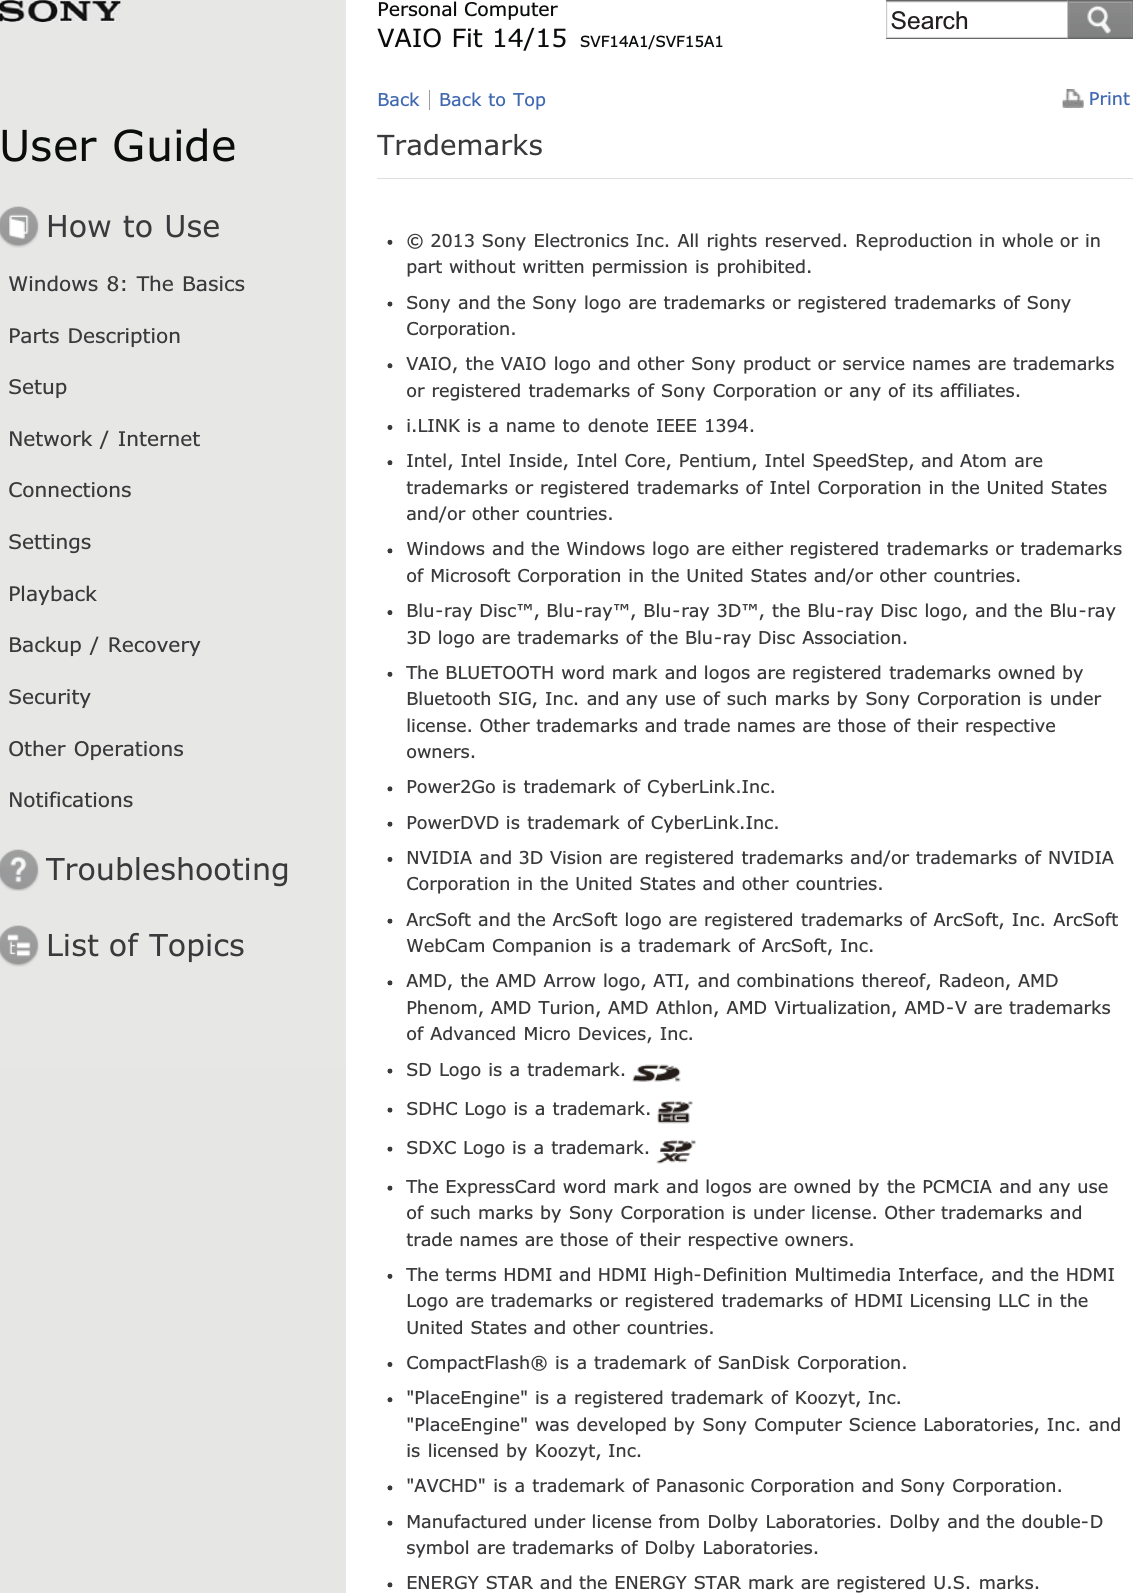 User GuideHow to UseWindows 8: The BasicsParts DescriptionSetupNetwork / InternetConnectionsSettingsPlaybackBackup / RecoverySecurityOther OperationsNotificationsTroubleshootingList of TopicsPrintPersonal ComputerVAIO Fit 14/15 SVF14A1/SVF15A1Trademarks© 2013 Sony Electronics Inc. All rights reserved. Reproduction in whole or inpart without written permission is prohibited.Sony and the Sony logo are trademarks or registered trademarks of SonyCorporation.VAIO, the VAIO logo and other Sony product or service names are trademarksor registered trademarks of Sony Corporation or any of its affiliates.i.LINK is a name to denote IEEE 1394.Intel, Intel Inside, Intel Core, Pentium, Intel SpeedStep, and Atom aretrademarks or registered trademarks of Intel Corporation in the United Statesand/or other countries.Windows and the Windows logo are either registered trademarks or trademarksof Microsoft Corporation in the United States and/or other countries.Blu-ray Disc™, Blu-ray™, Blu-ray 3D™, the Blu-ray Disc logo, and the Blu-ray3D logo are trademarks of the Blu-ray Disc Association.The BLUETOOTH word mark and logos are registered trademarks owned byBluetooth SIG, Inc. and any use of such marks by Sony Corporation is underlicense. Other trademarks and trade names are those of their respectiveowners.Power2Go is trademark of CyberLink.Inc.PowerDVD is trademark of CyberLink.Inc.NVIDIA and 3D Vision are registered trademarks and/or trademarks of NVIDIACorporation in the United States and other countries.ArcSoft and the ArcSoft logo are registered trademarks of ArcSoft, Inc. ArcSoftWebCam Companion is a trademark of ArcSoft, Inc.AMD, the AMD Arrow logo, ATI, and combinations thereof, Radeon, AMDPhenom, AMD Turion, AMD Athlon, AMD Virtualization, AMD-V are trademarksof Advanced Micro Devices, Inc.SD Logo is a trademark.SDHC Logo is a trademark.SDXC Logo is a trademark.The ExpressCard word mark and logos are owned by the PCMCIA and any useof such marks by Sony Corporation is under license. Other trademarks andtrade names are those of their respective owners.The terms HDMI and HDMI High-Definition Multimedia Interface, and the HDMILogo are trademarks or registered trademarks of HDMI Licensing LLC in theUnited States and other countries.CompactFlash® is a trademark of SanDisk Corporation.&quot;PlaceEngine&quot; is a registered trademark of Koozyt, Inc.&quot;PlaceEngine&quot; was developed by Sony Computer Science Laboratories, Inc. andis licensed by Koozyt, Inc.&quot;AVCHD&quot; is a trademark of Panasonic Corporation and Sony Corporation.Manufactured under license from Dolby Laboratories. Dolby and the double-Dsymbol are trademarks of Dolby Laboratories.ENERGY STAR and the ENERGY STAR mark are registered U.S. marks.Back Back to TopSearch